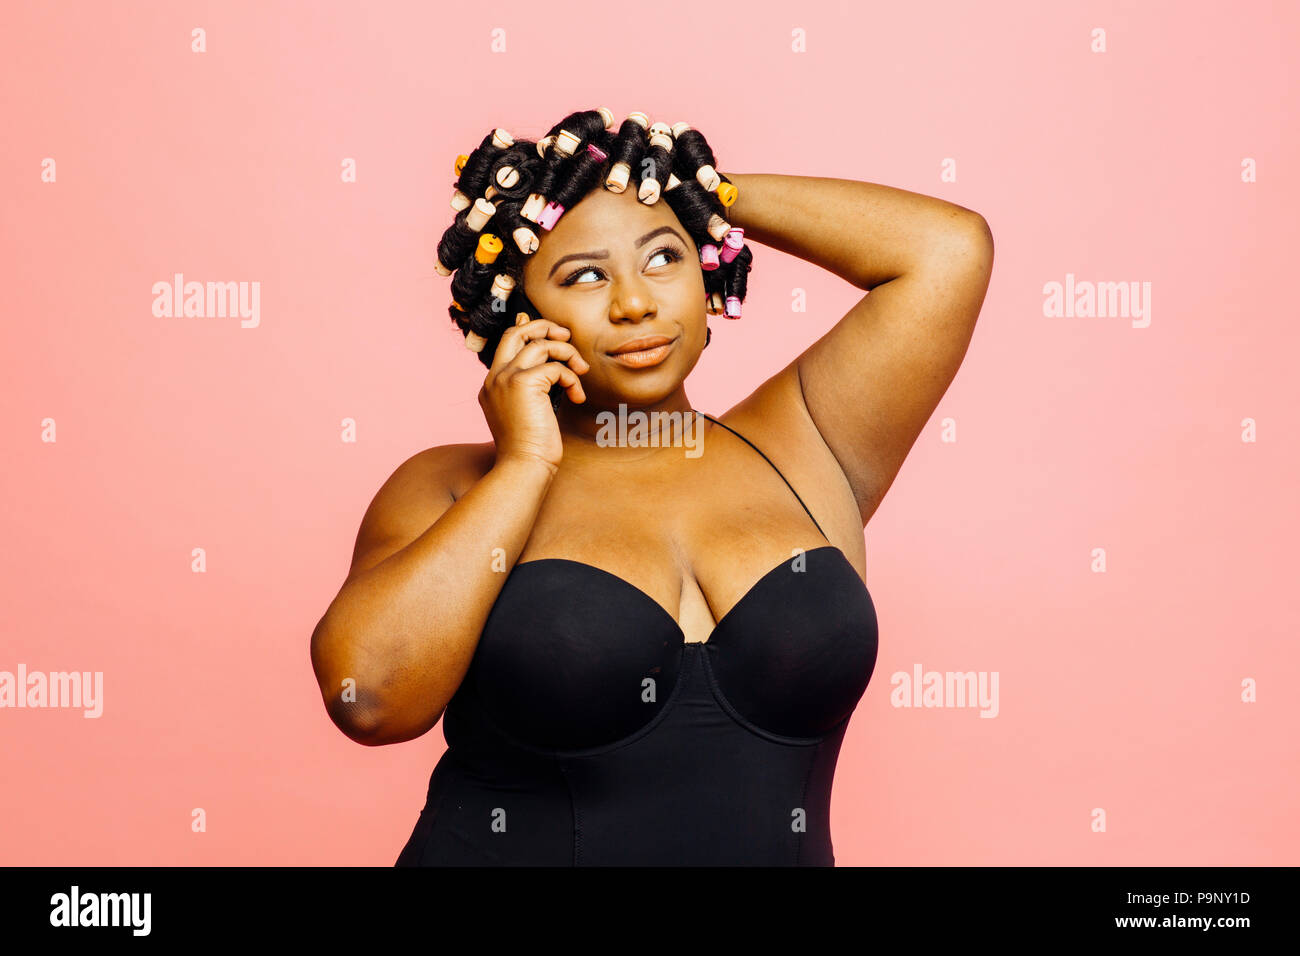 Woman with hair curlers and neglige talking on the phone and looking up, isolated on pink background Stock Photo